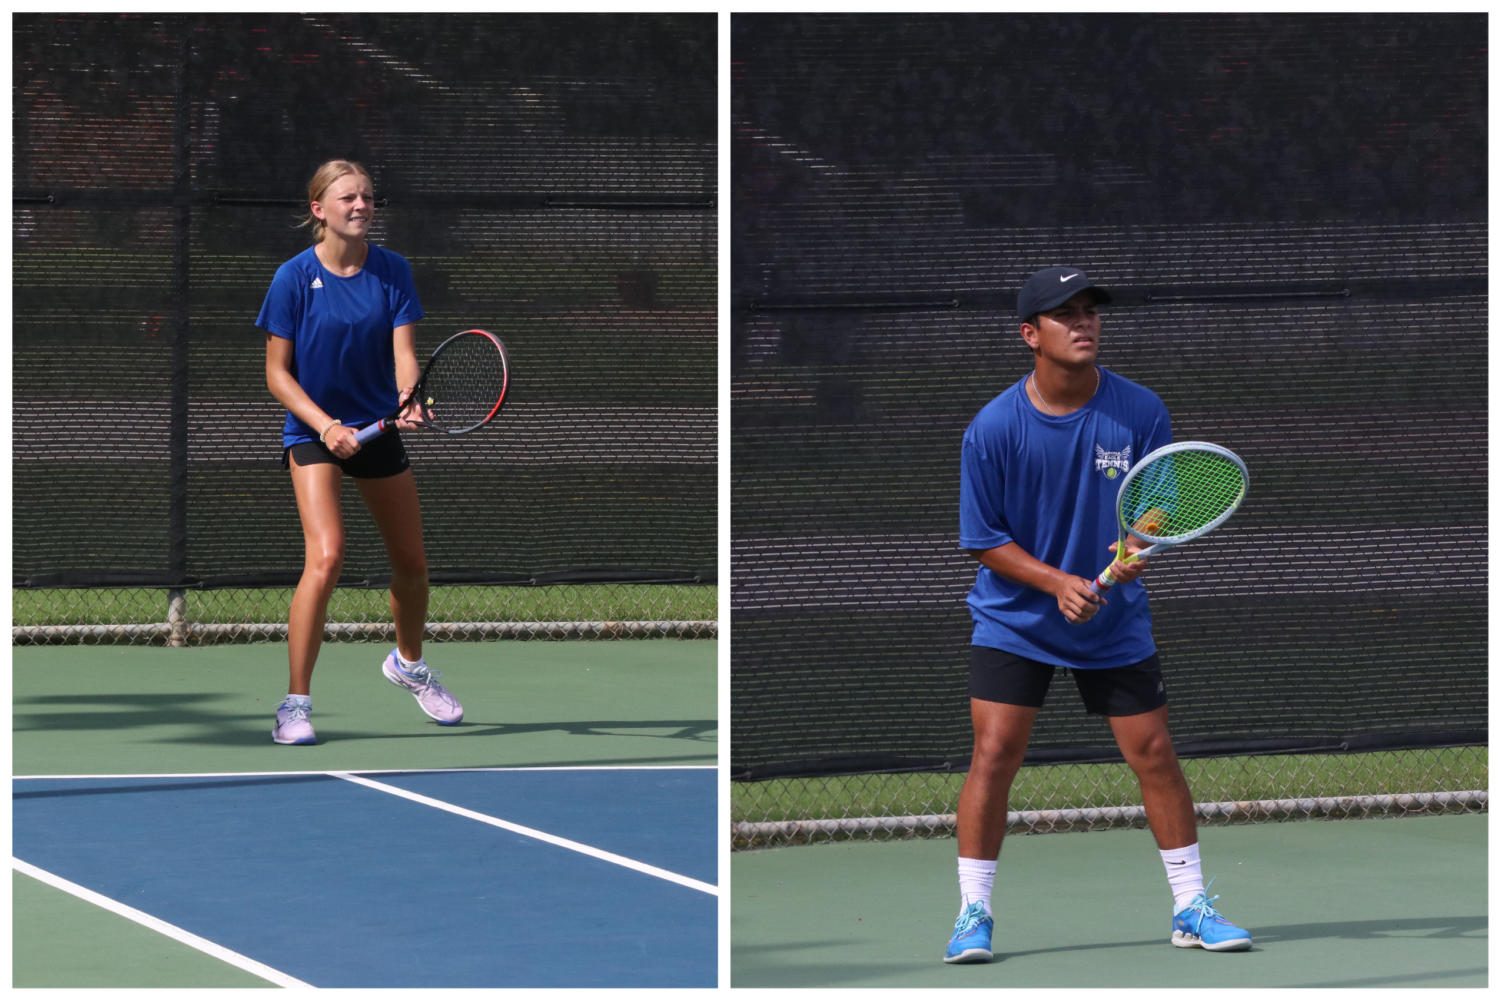 Junior Emilio Rodriguez and senior Bailee Lane are the top tennis players on the varsity team.